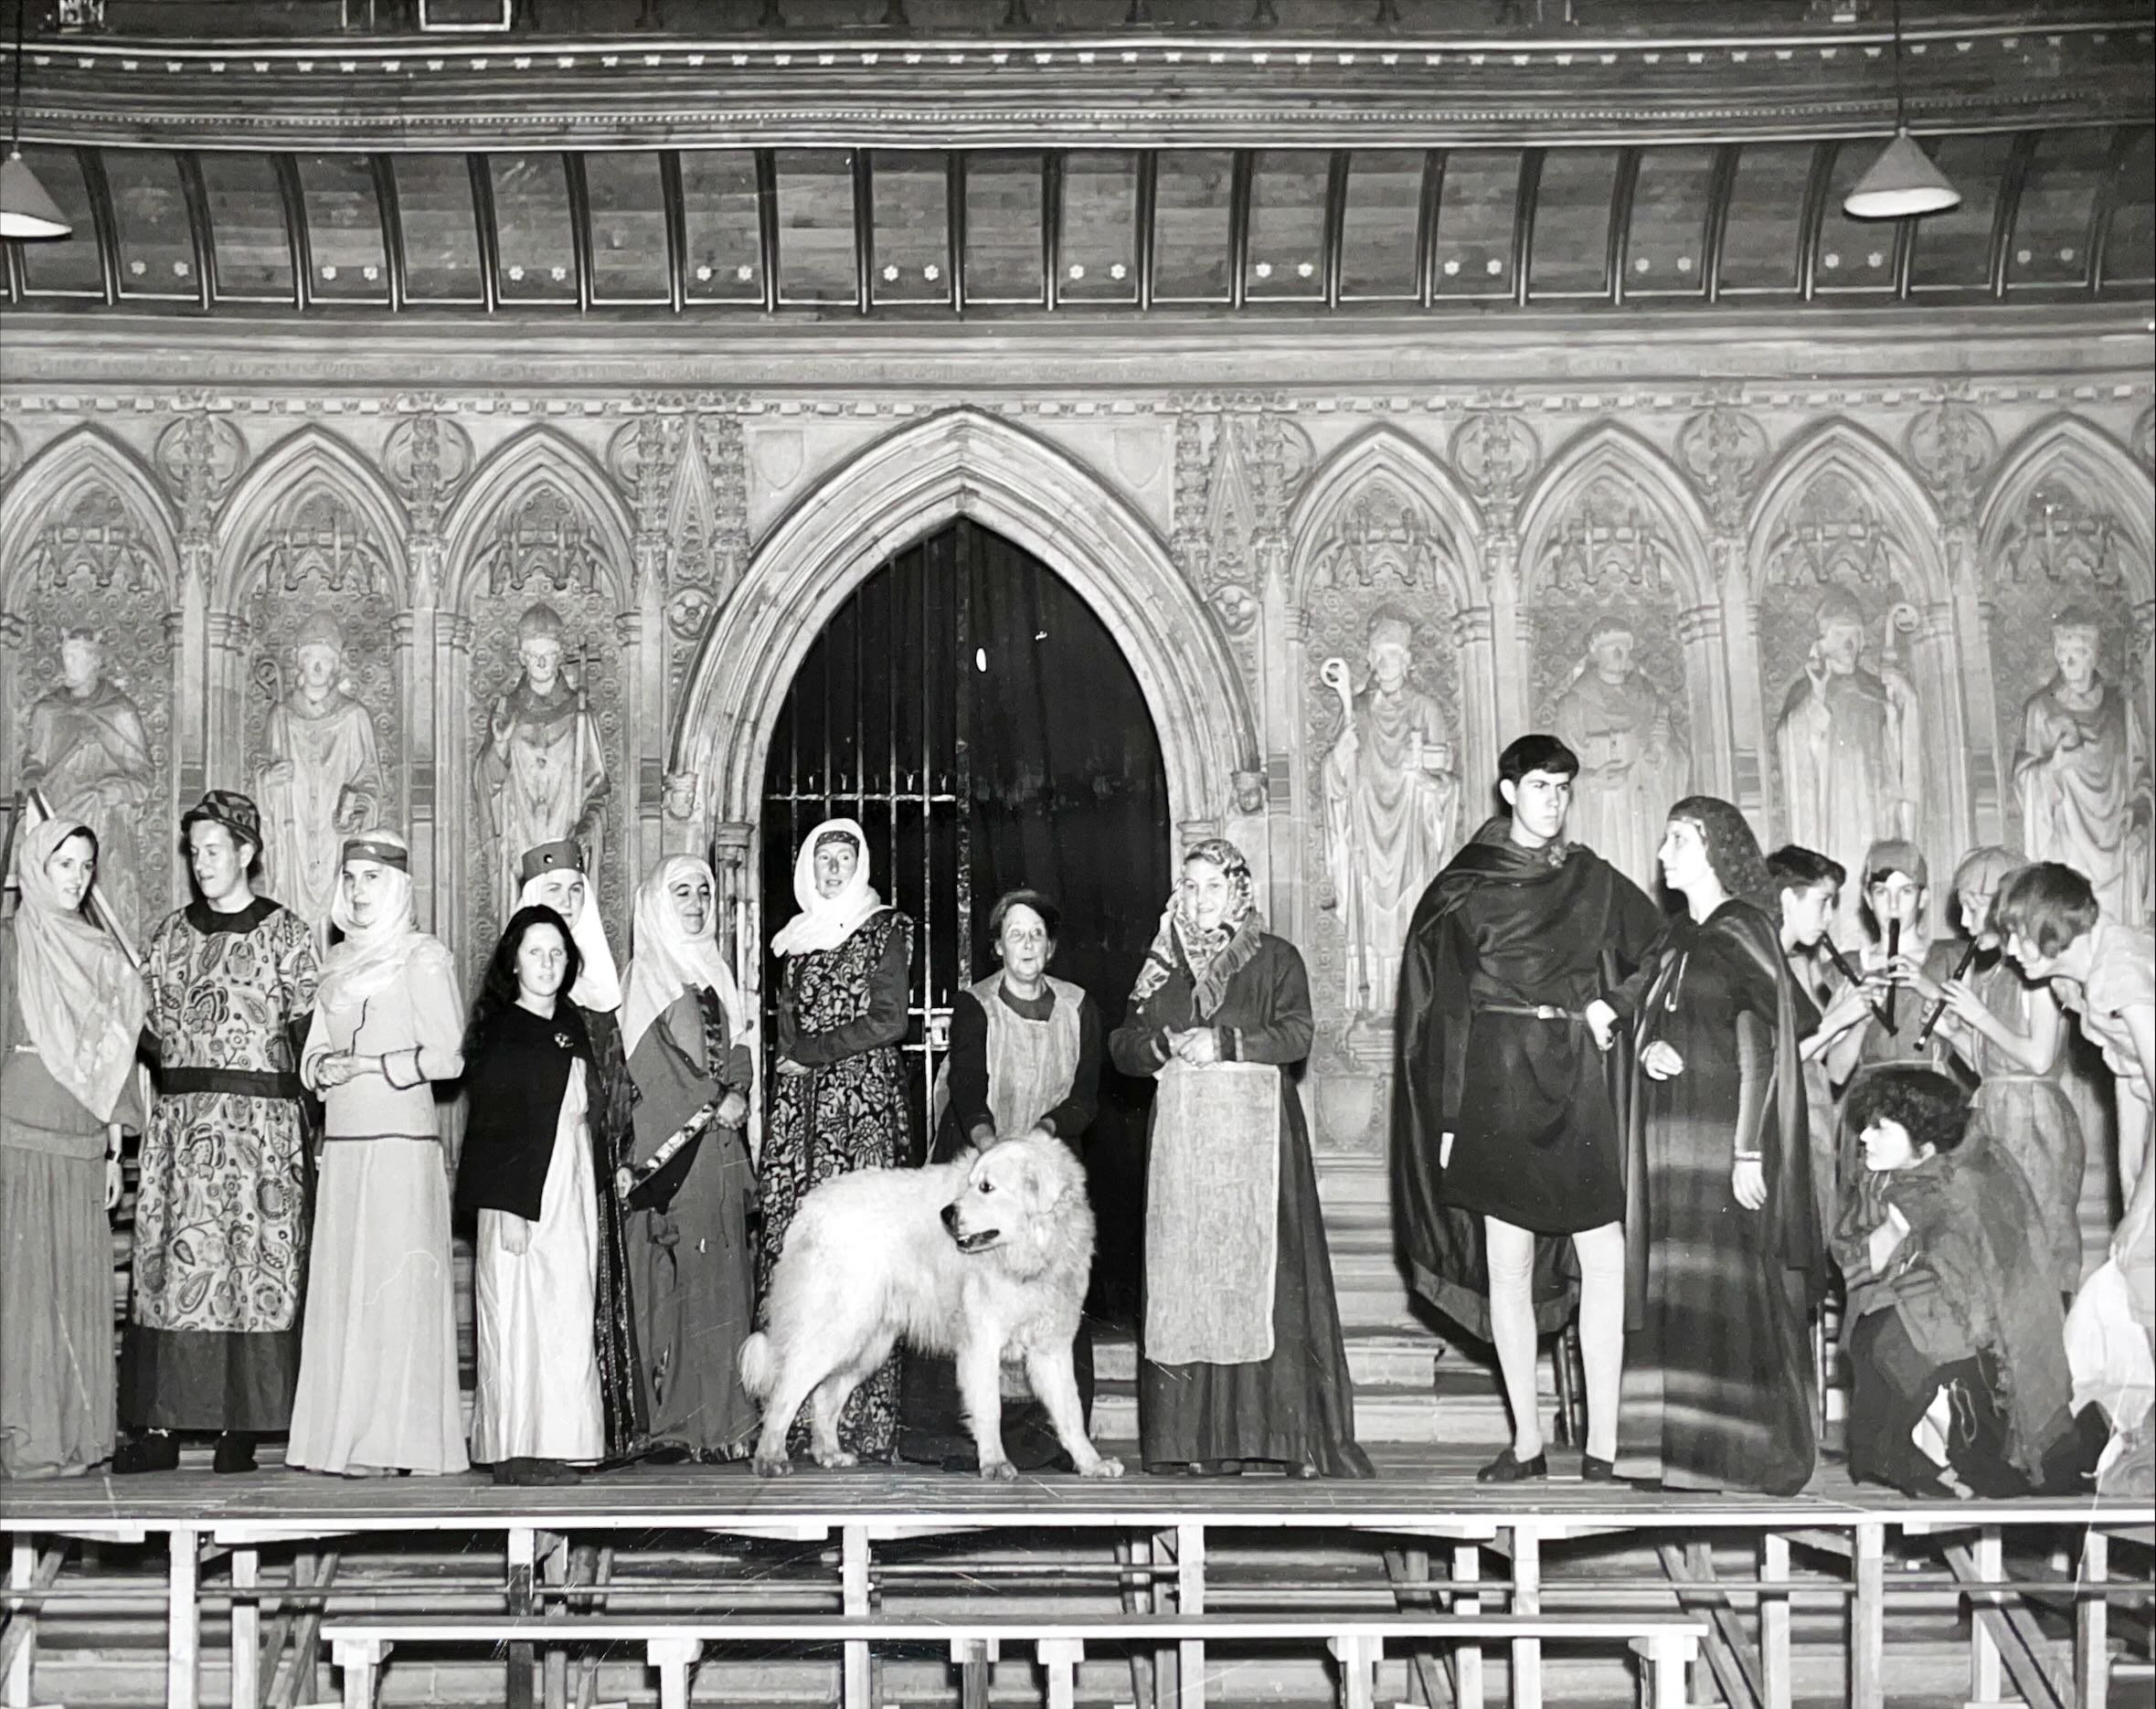 Scenes from festival play, The Baker Saint, by the Medway Theatre Guild, June 1952 (1 of 2)